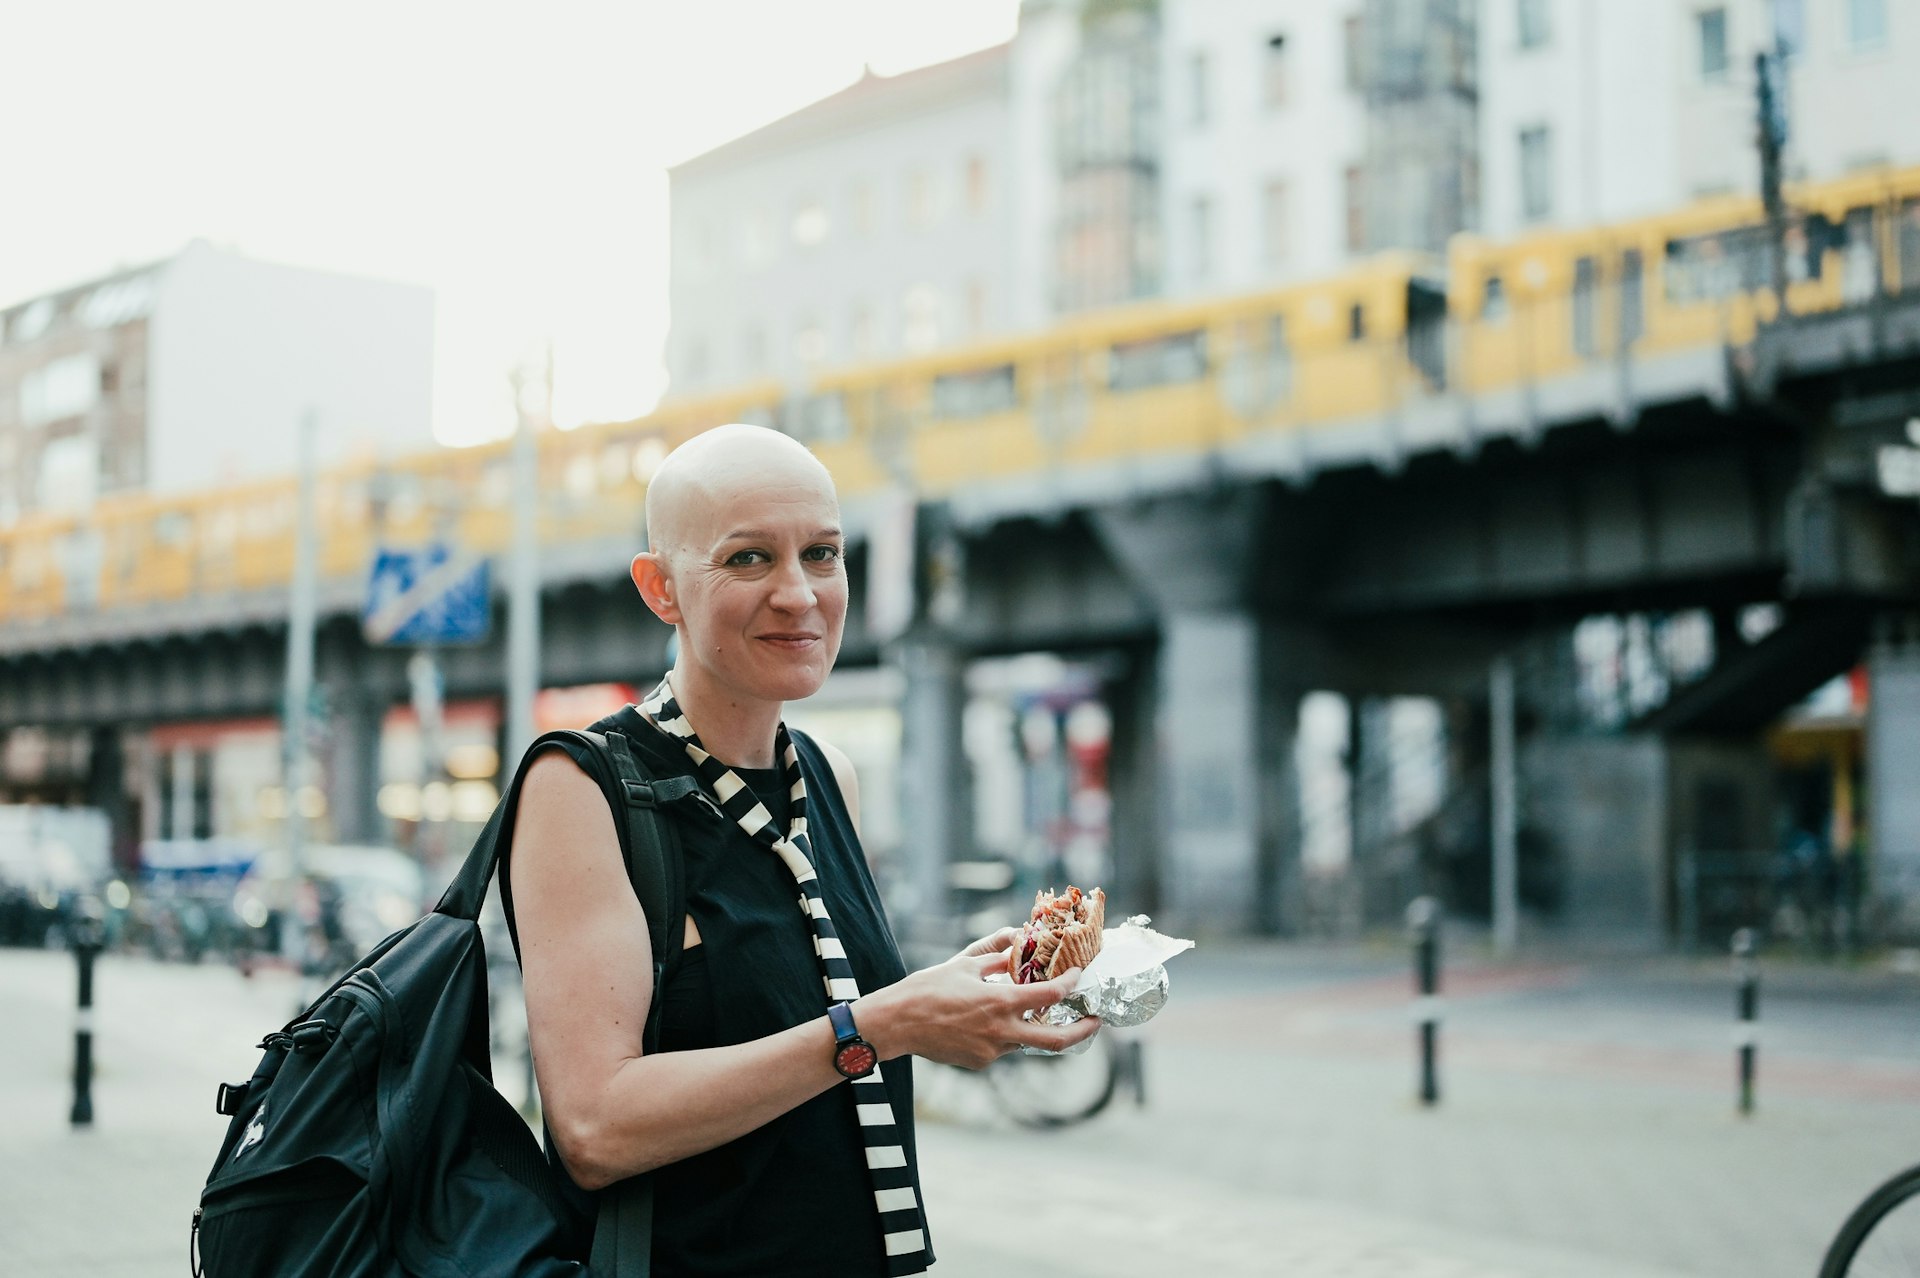 A woman with a shaven head eating a doner kebab on the street in Berlin